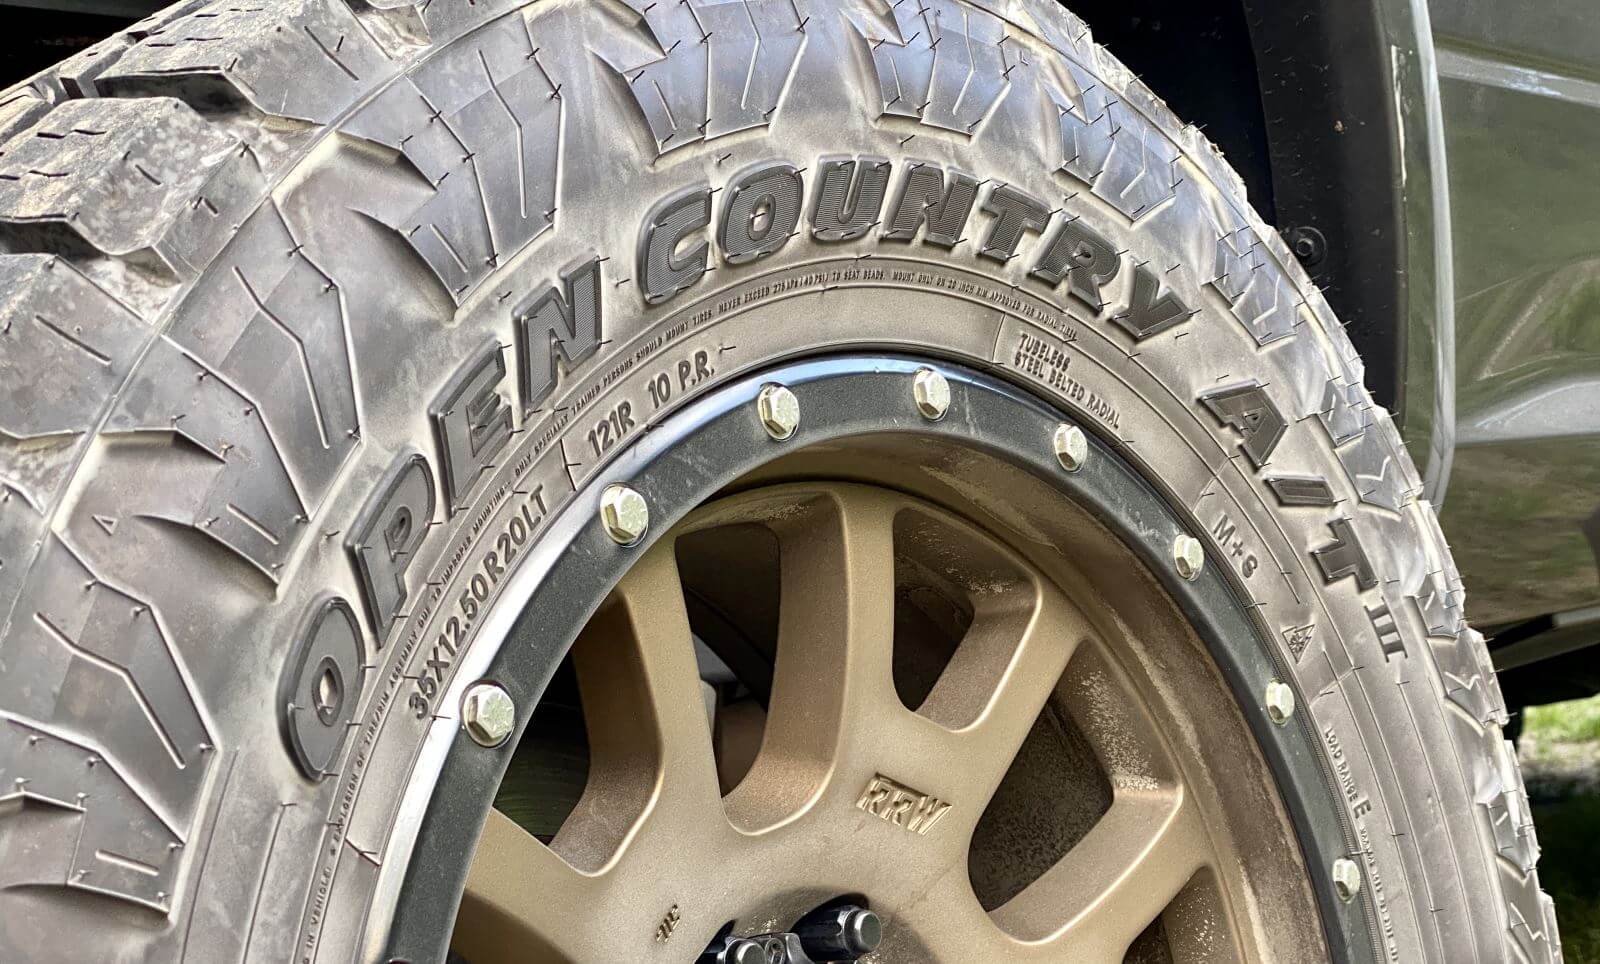 TOYO® OPEN COUNTRY A/T III - 225/70R16 103T